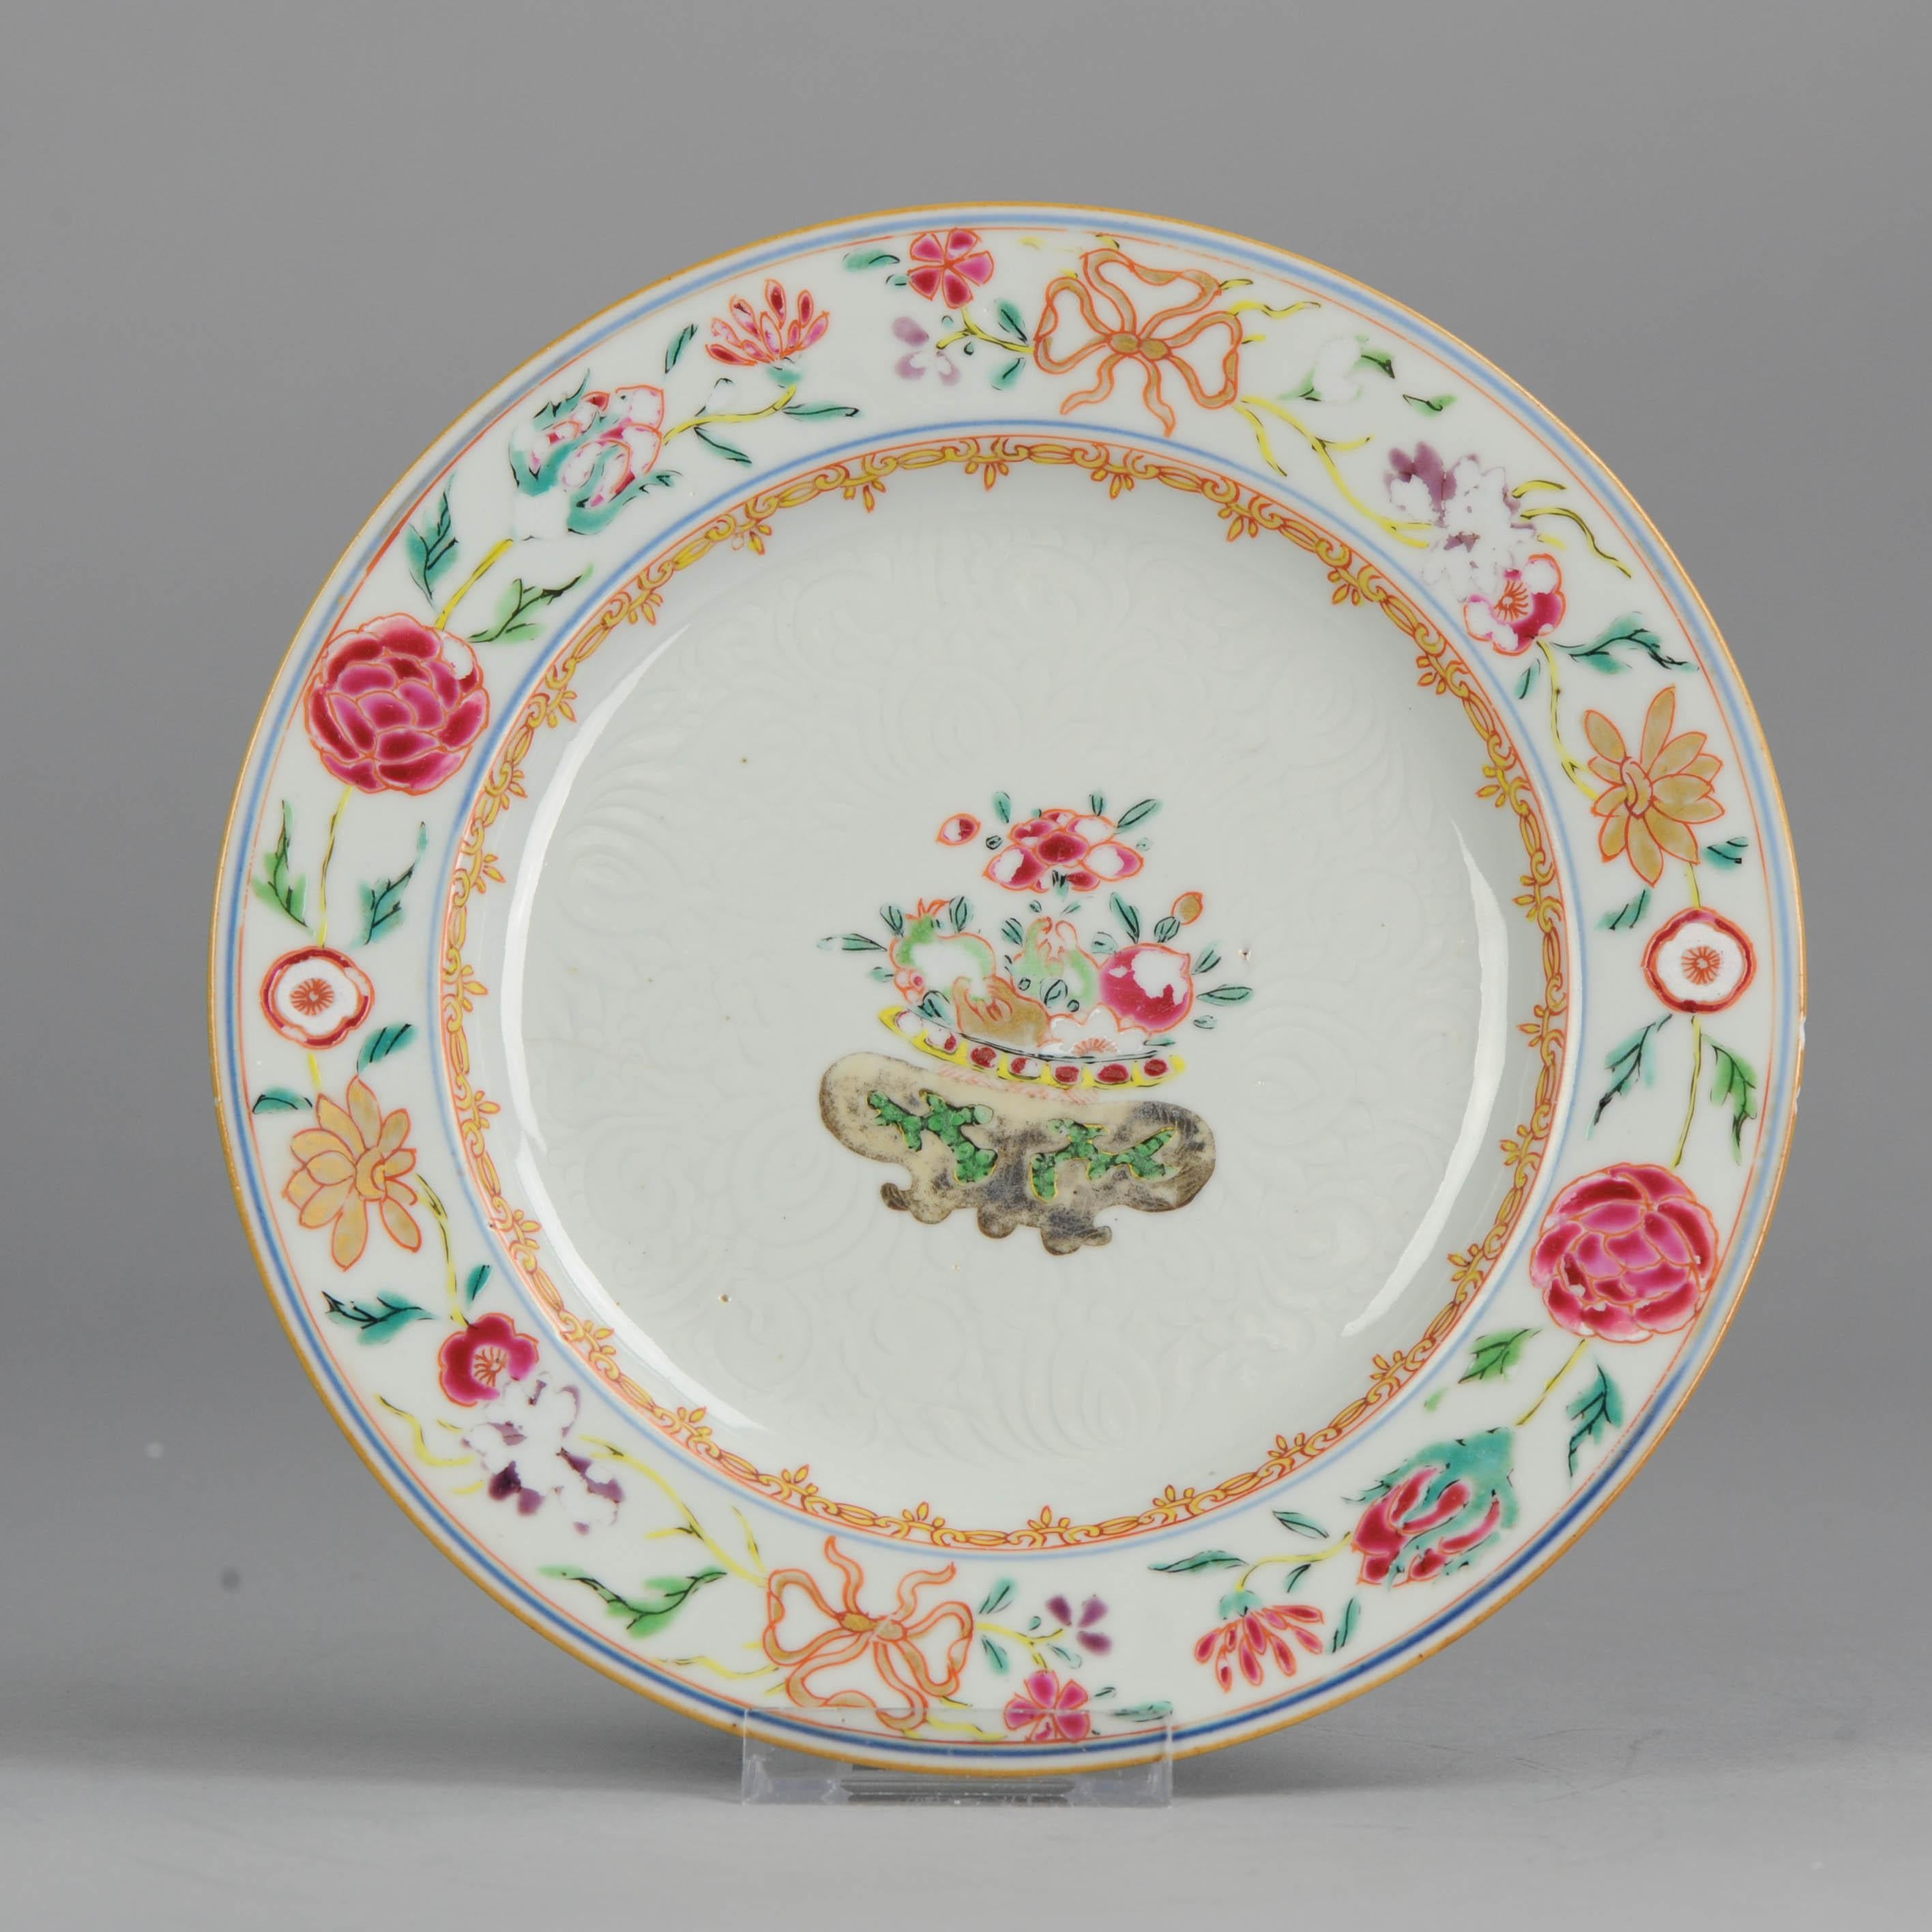 Perfect for interior wall decoration. We offer sets of 18th century Chinese Famille plates. Available in every quantity needed. The selection in the pictures might not be available due to stock changes, but we have around 100 Chinese Famille Rose